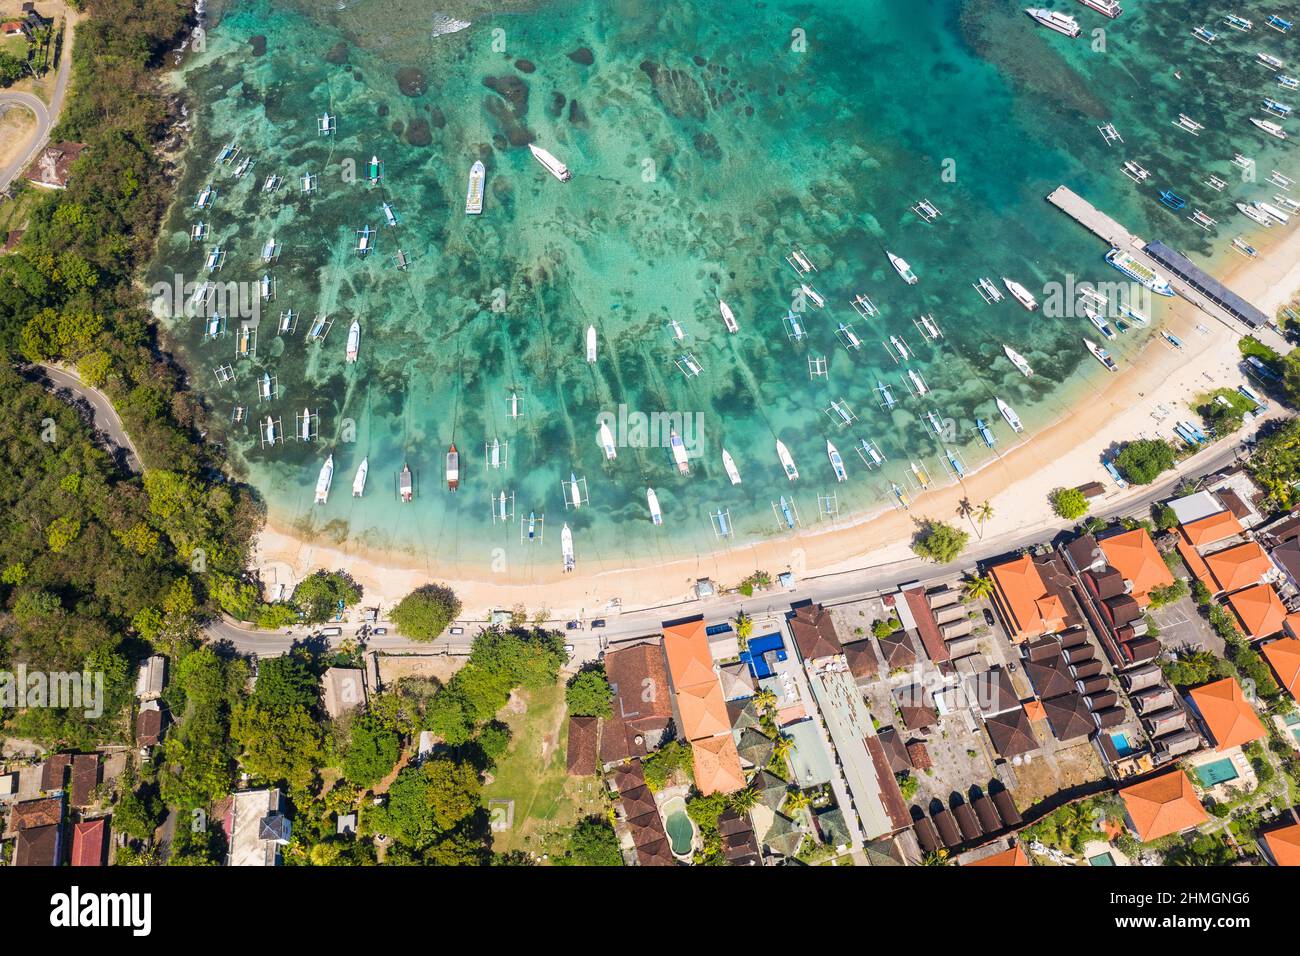 Dramatic aerial view of the Padang Bai village and harbor in east Bali in Indonesia Stock Photo